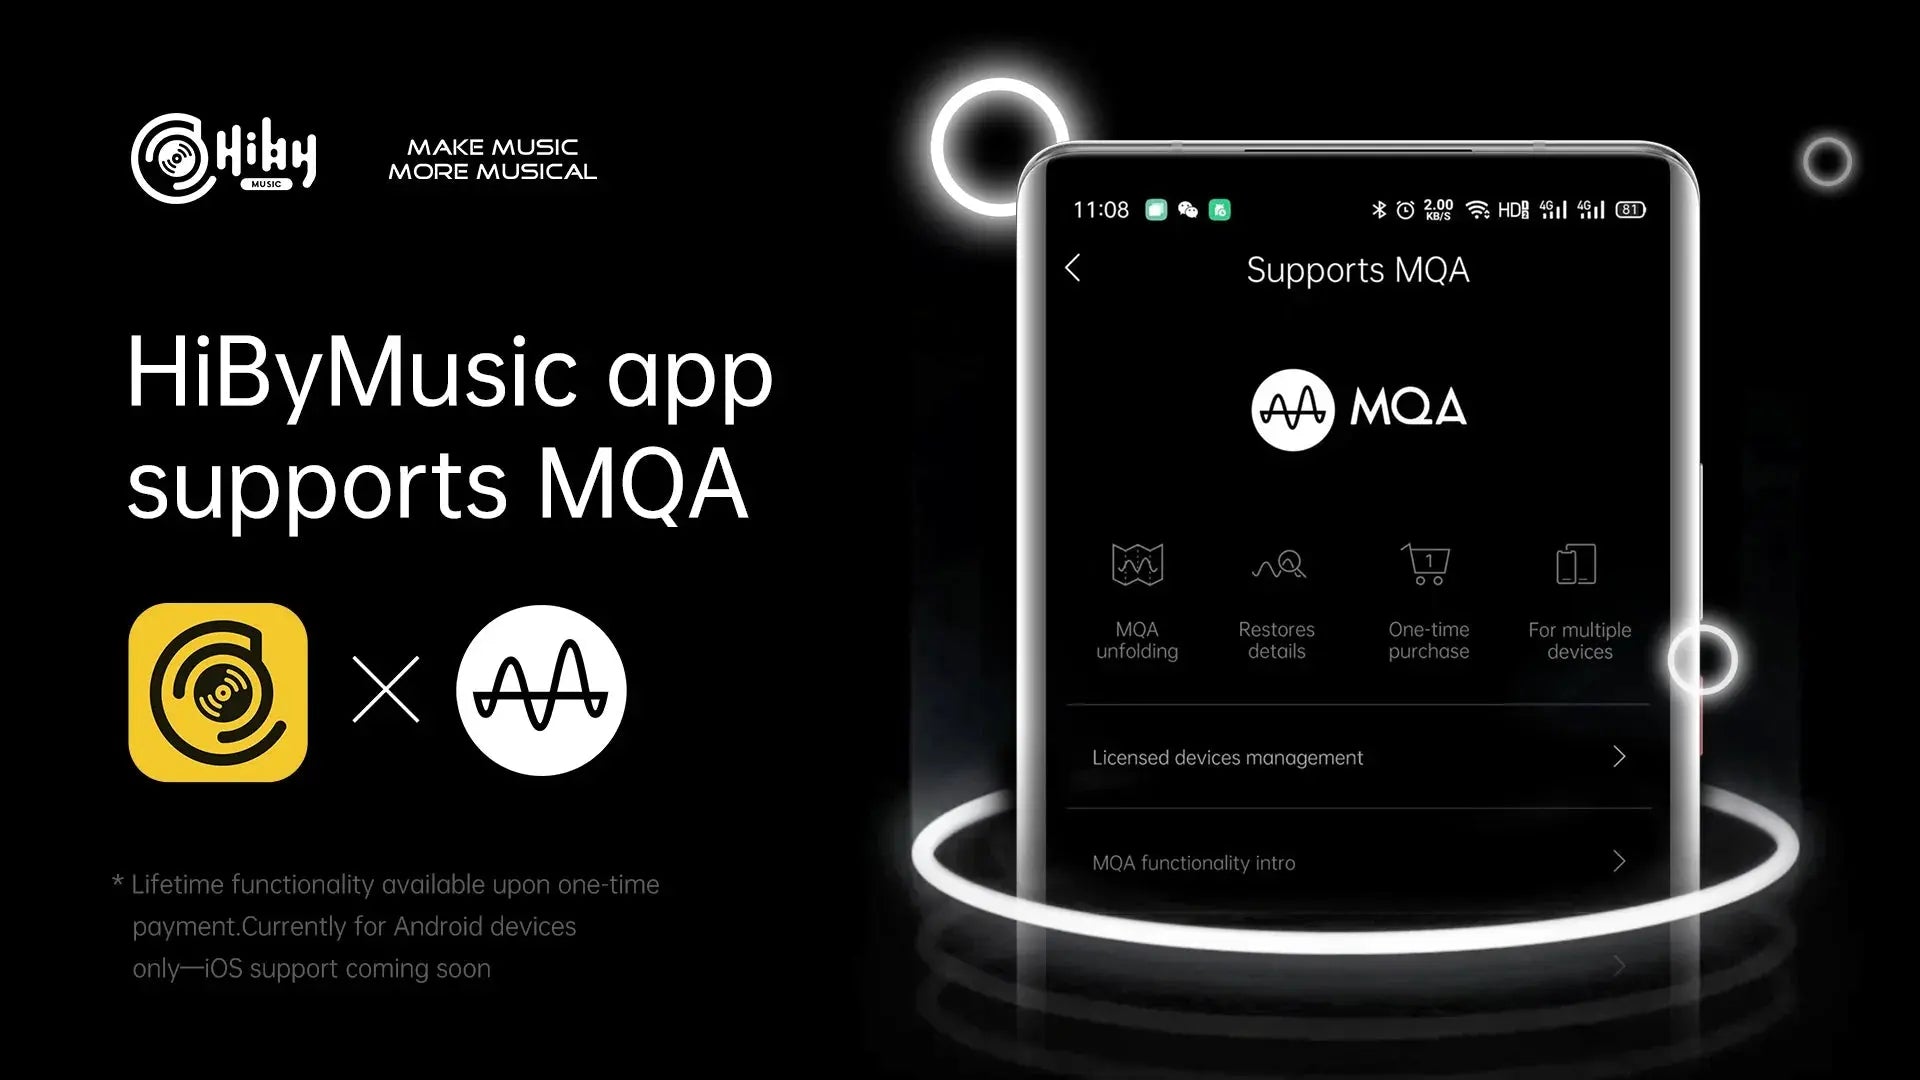 HIBY MUSIC PARTNERS WITH MQA TO OFFER HI-RES AUDIO